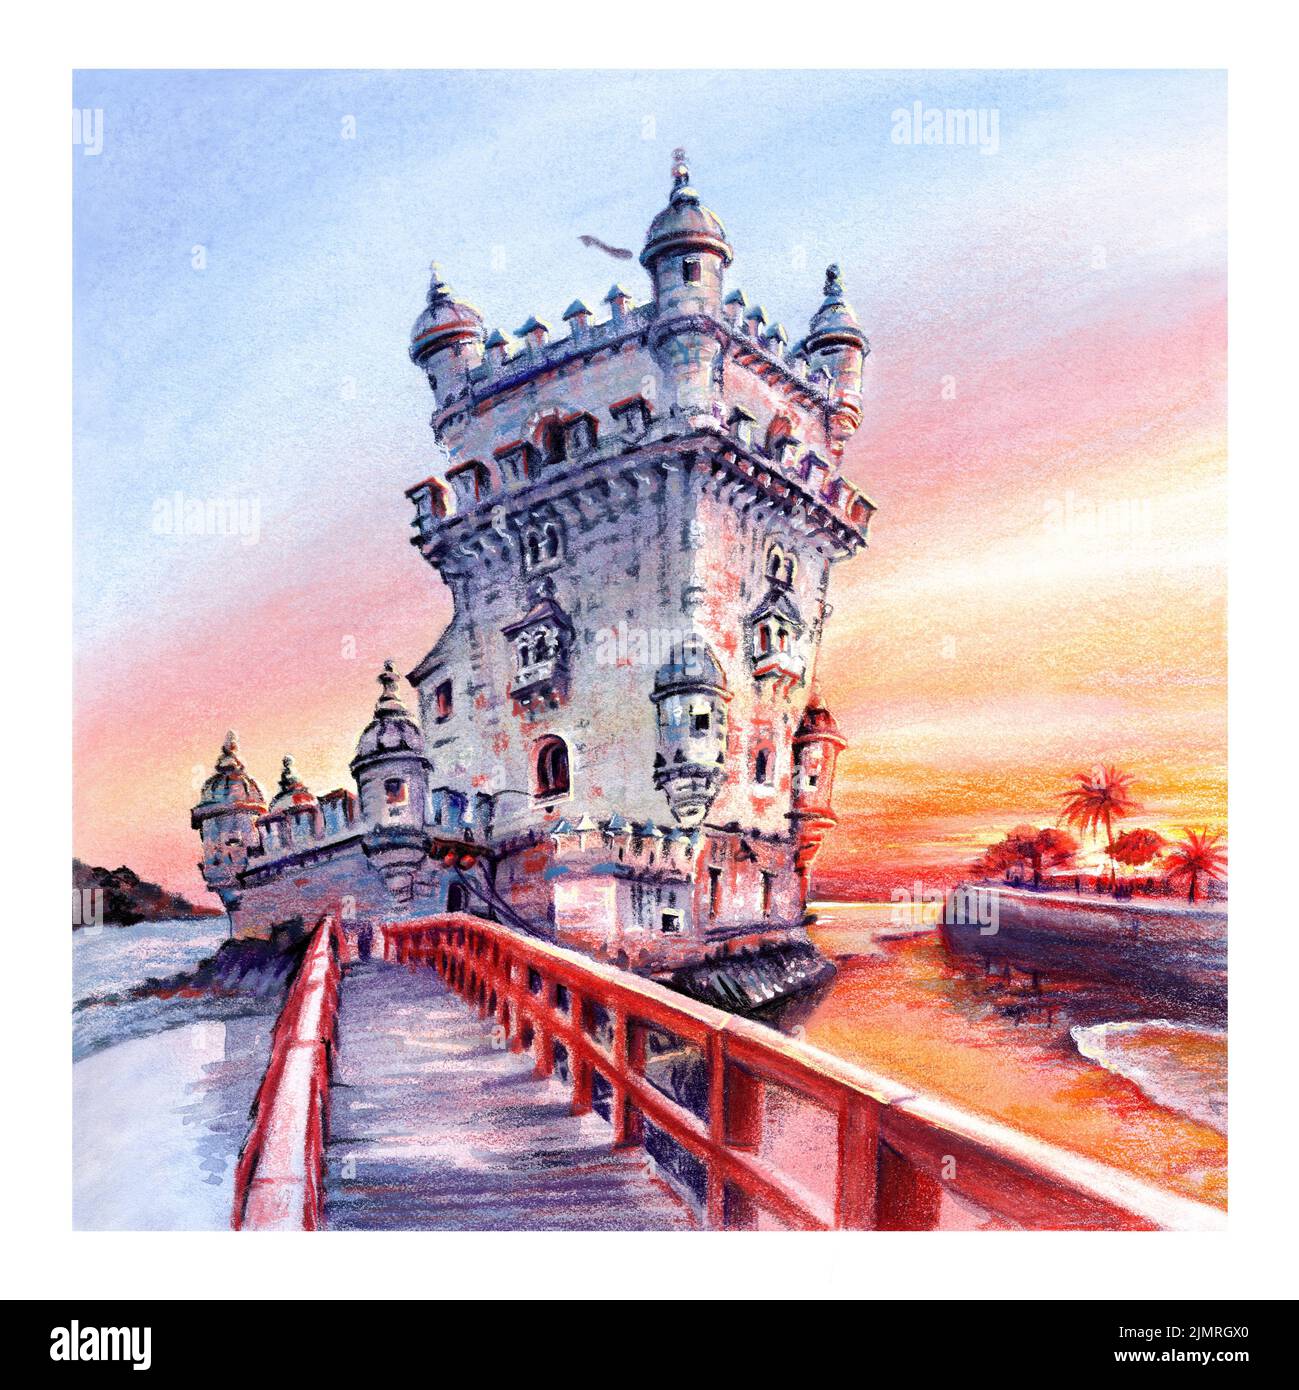 Watercolor sketch of Belem Tower at scenic sunset, Lisbon, Portugal Stock Photo